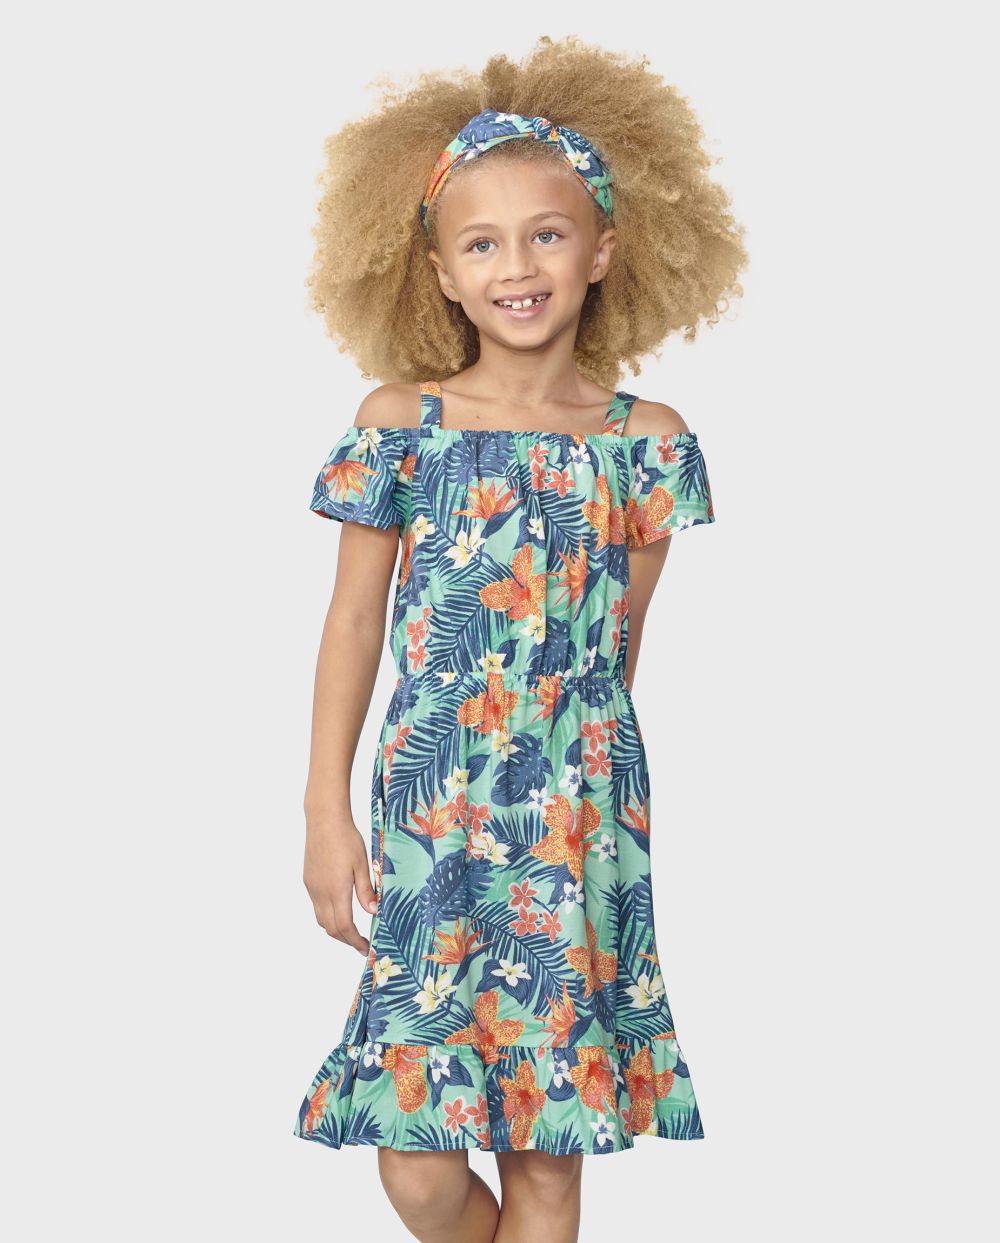 Girls Rayon Tropical Print Above the Knee Off the Shoulder Sleeveless Dress With Ruffles